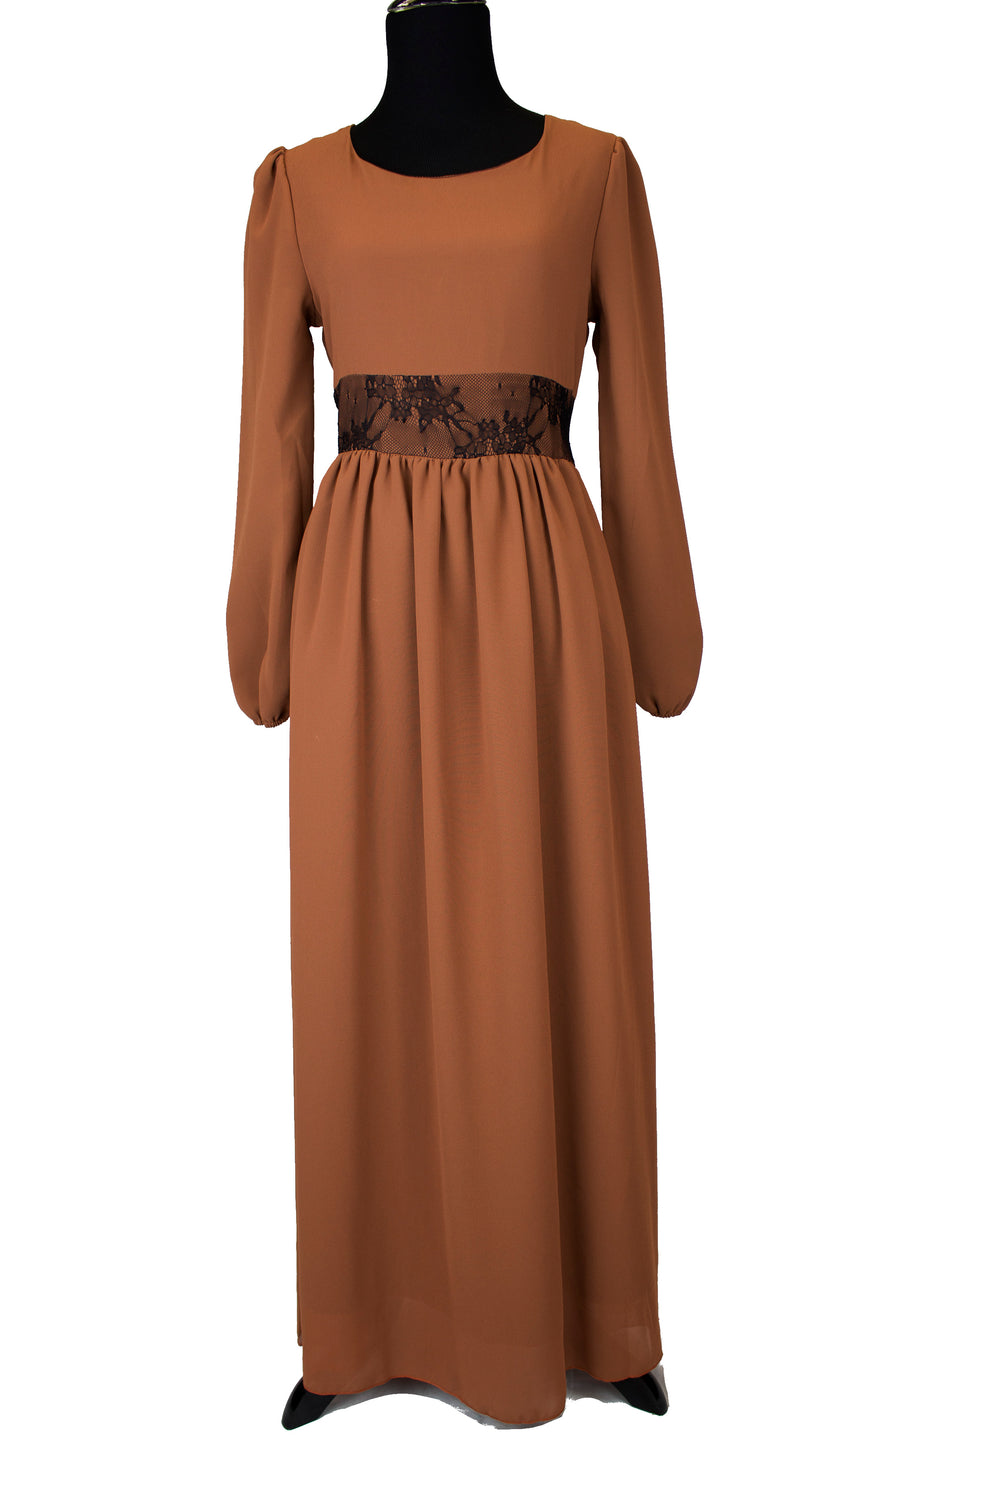 brown long sleeve maxi dress with a lace waist